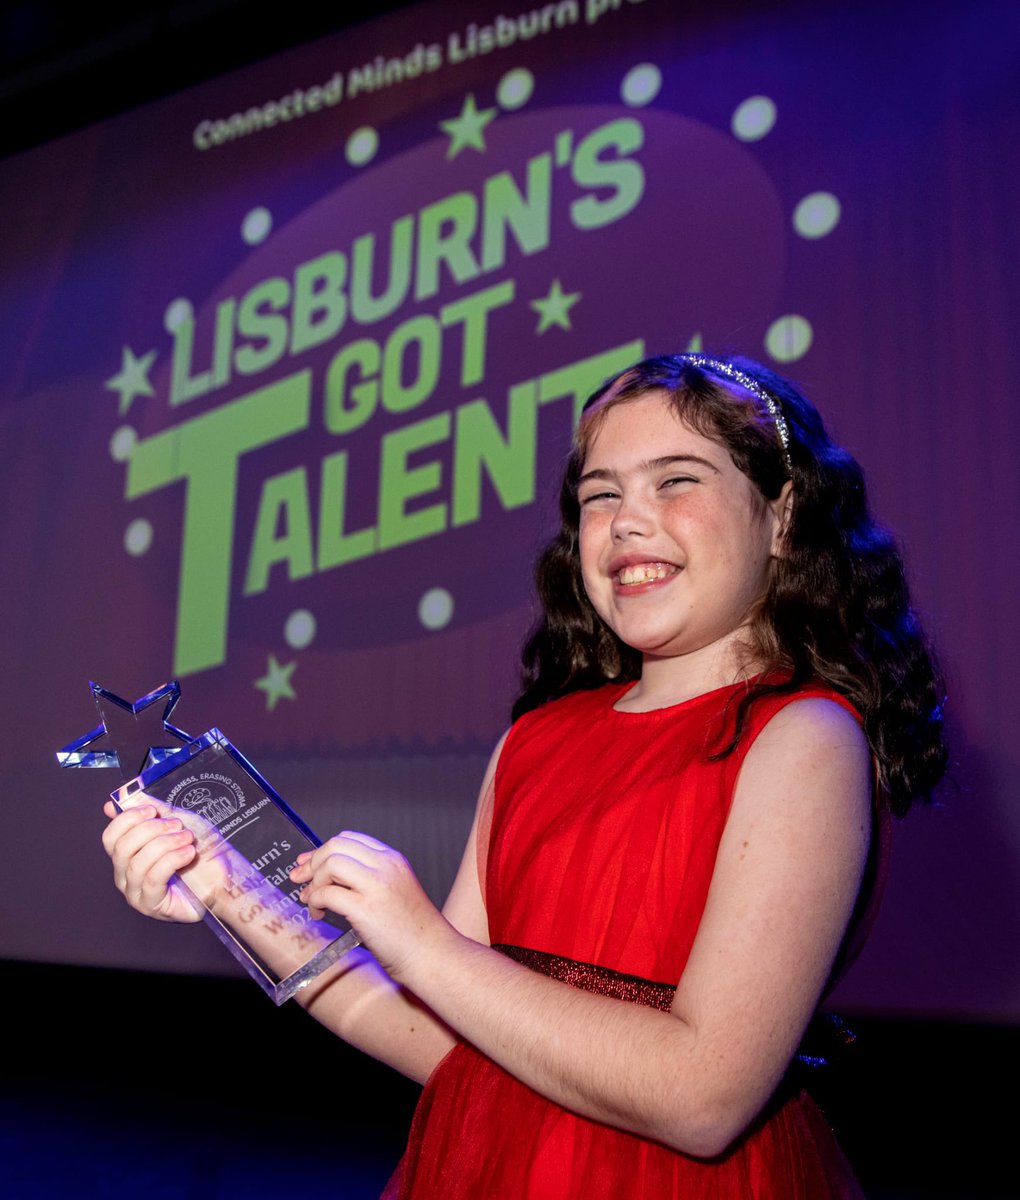 Lisburns Got Talent 2023 winner Isla McManus. What a worthy winner too! Every year this show just gets bigger and better. The youngest winner to date, Isla did not disappoint. You have a fabulous future ahead of you Isla, congratulations 🏆🥇#LGT23 #mentalhealthmatters